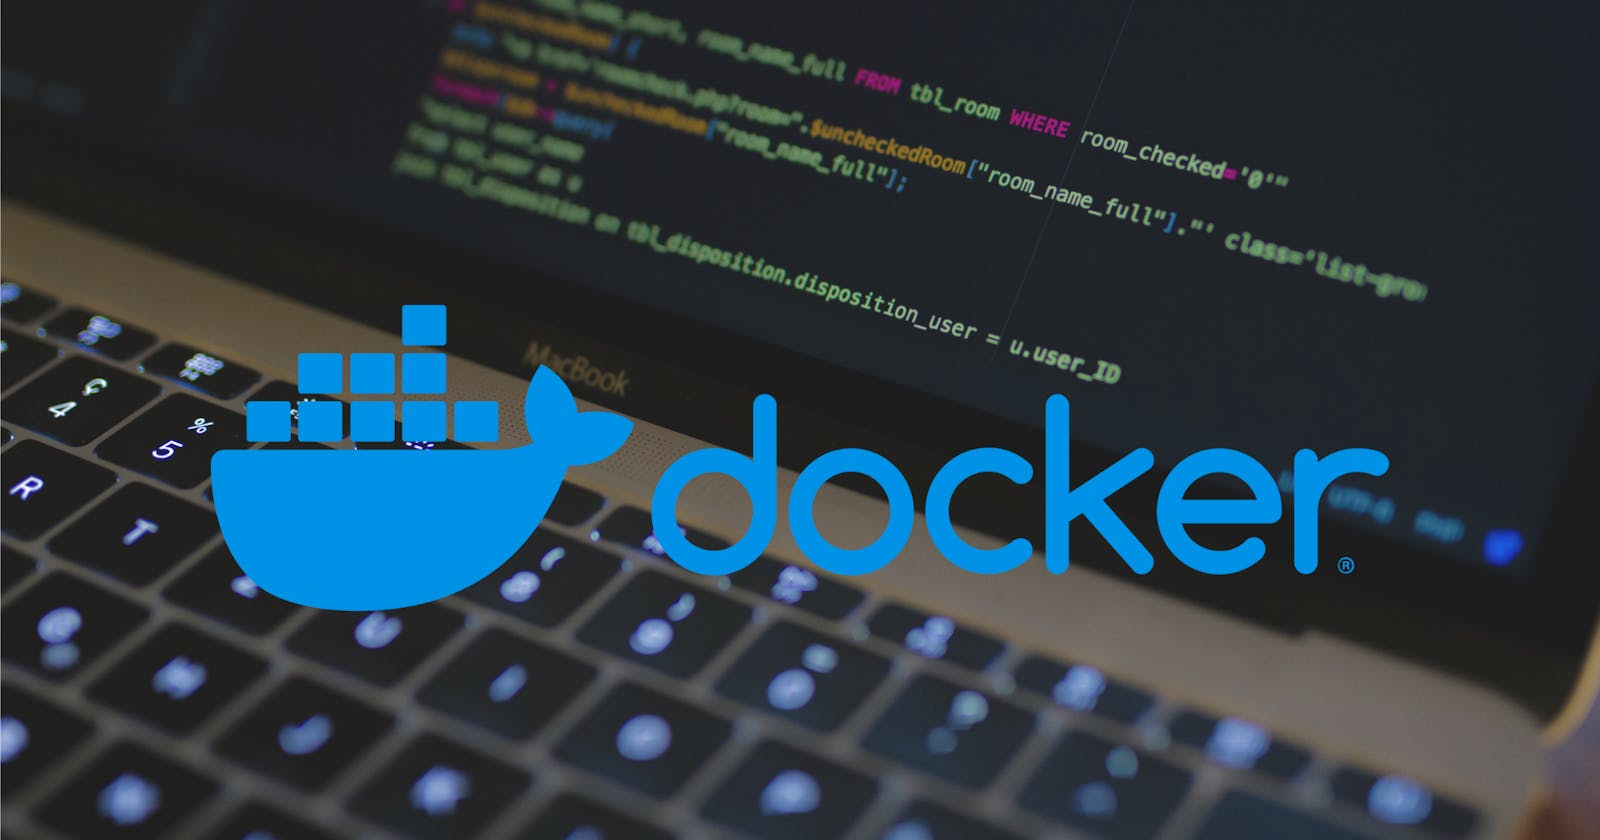 Say hi to my first steps in Docker learning!